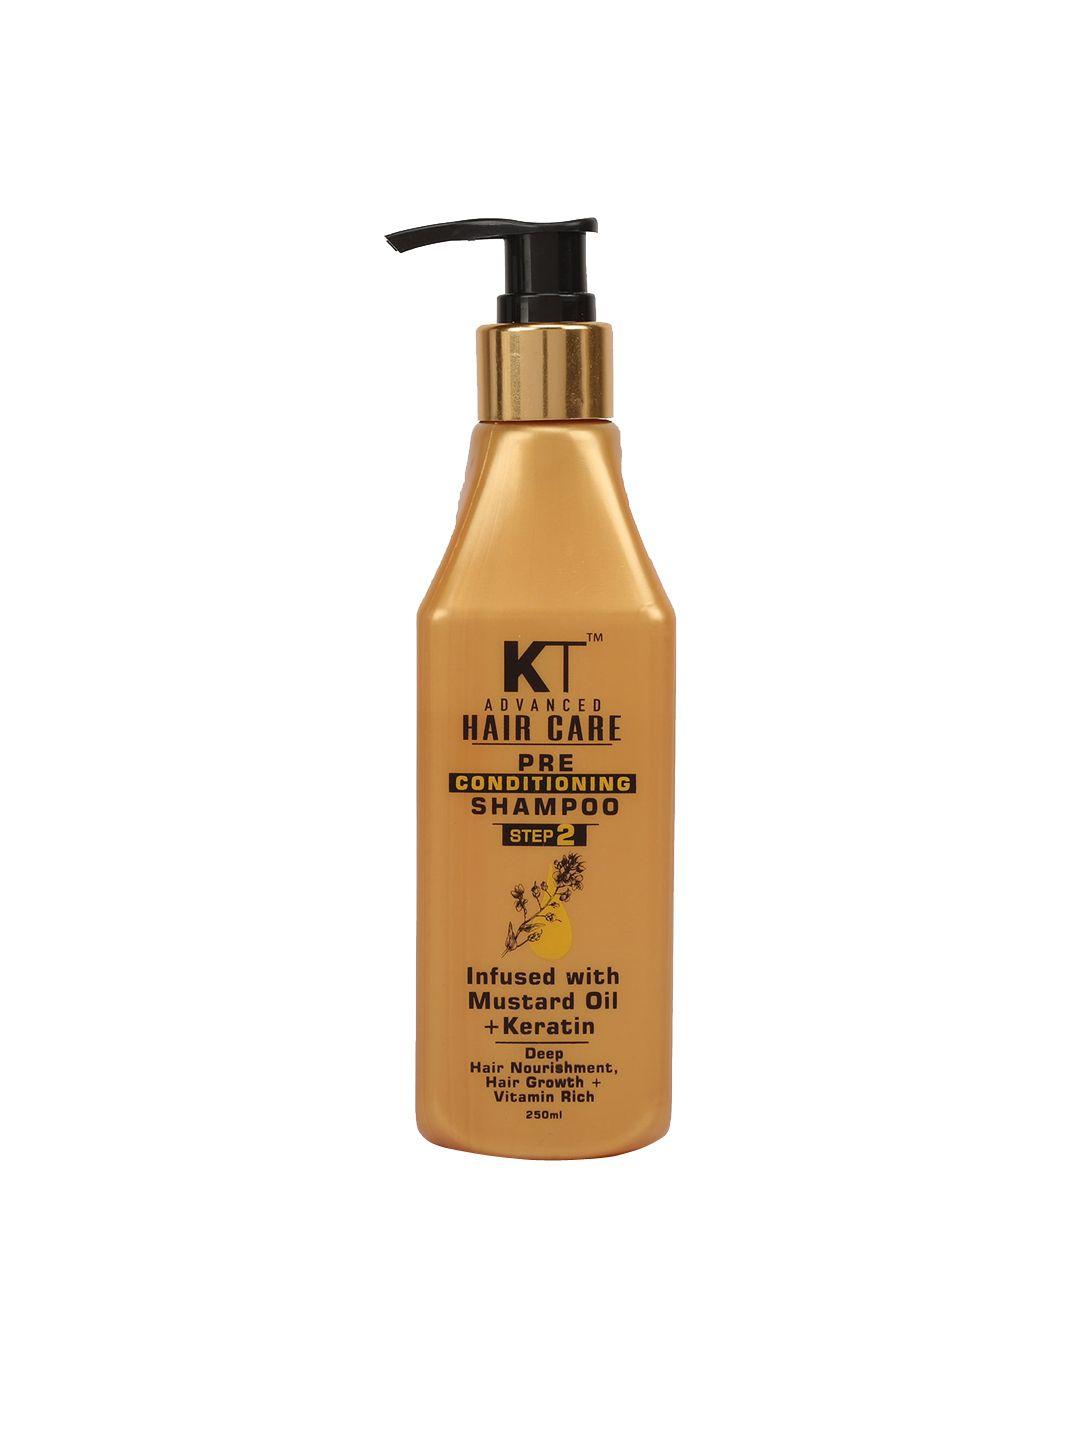 KEHAIRTHERAPY Advanced Hair Care Pre-Conditioning Shampoo with Mustard Oil & Keratin-250ml